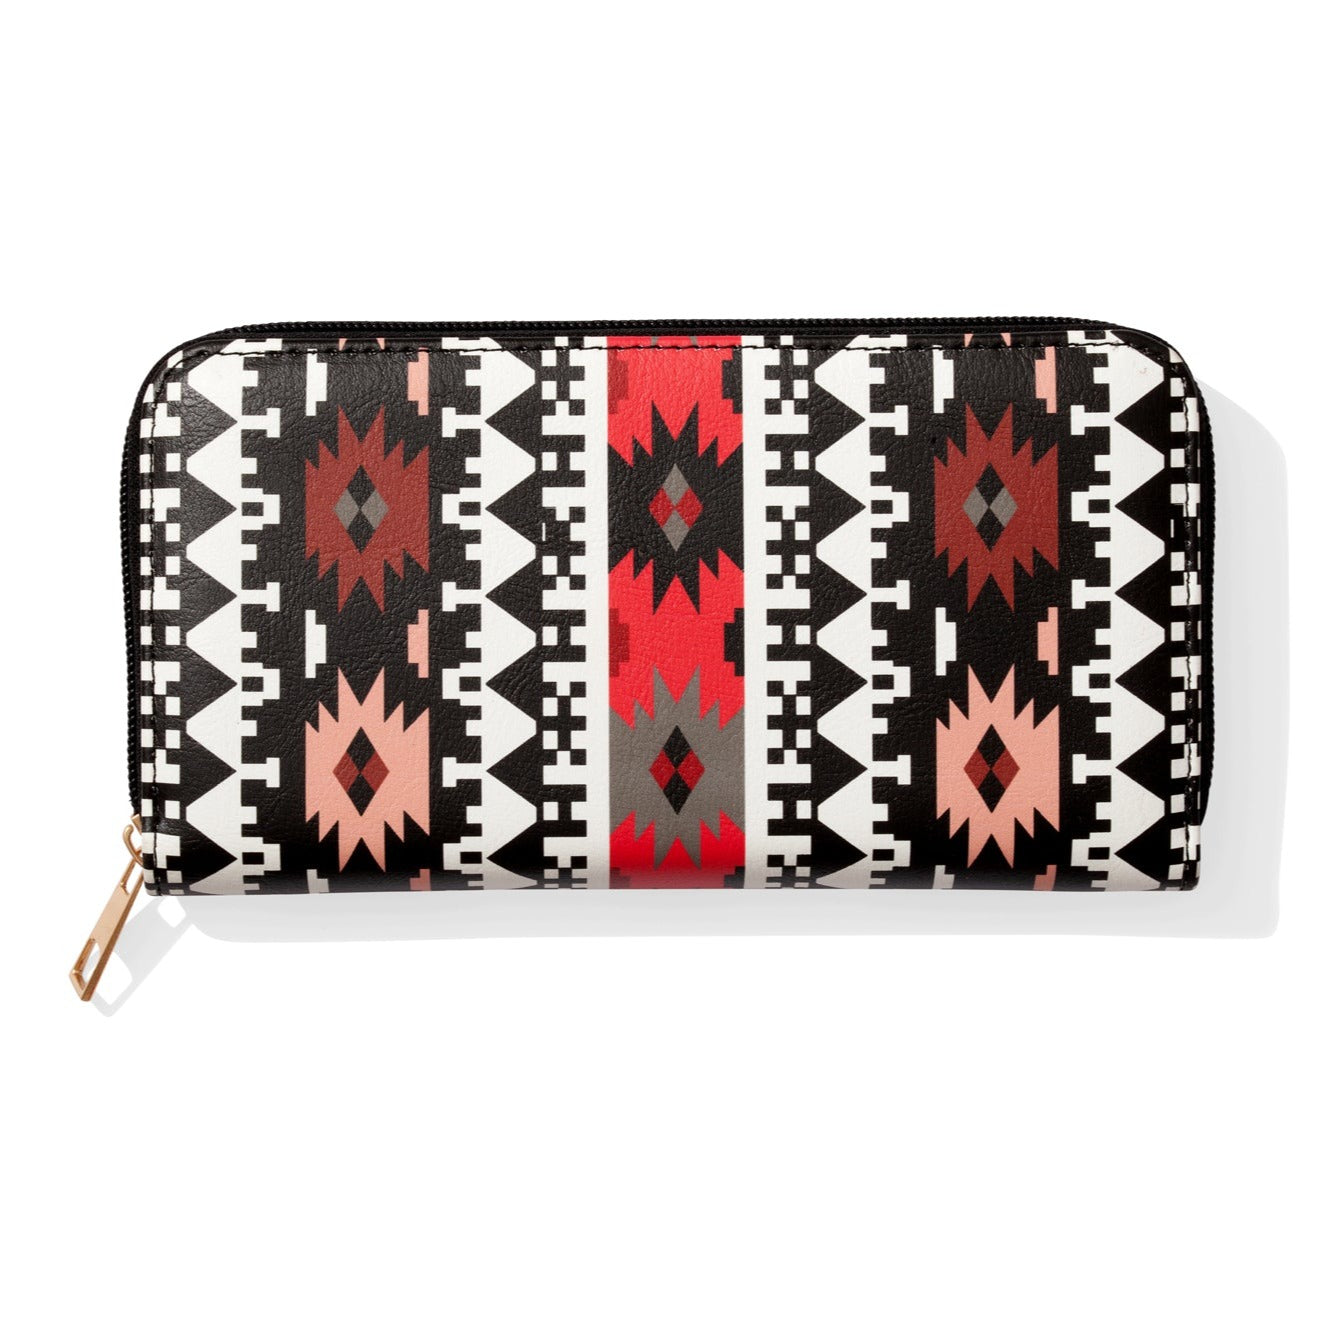 Southwest style pattern on zippered wallet with gold zips